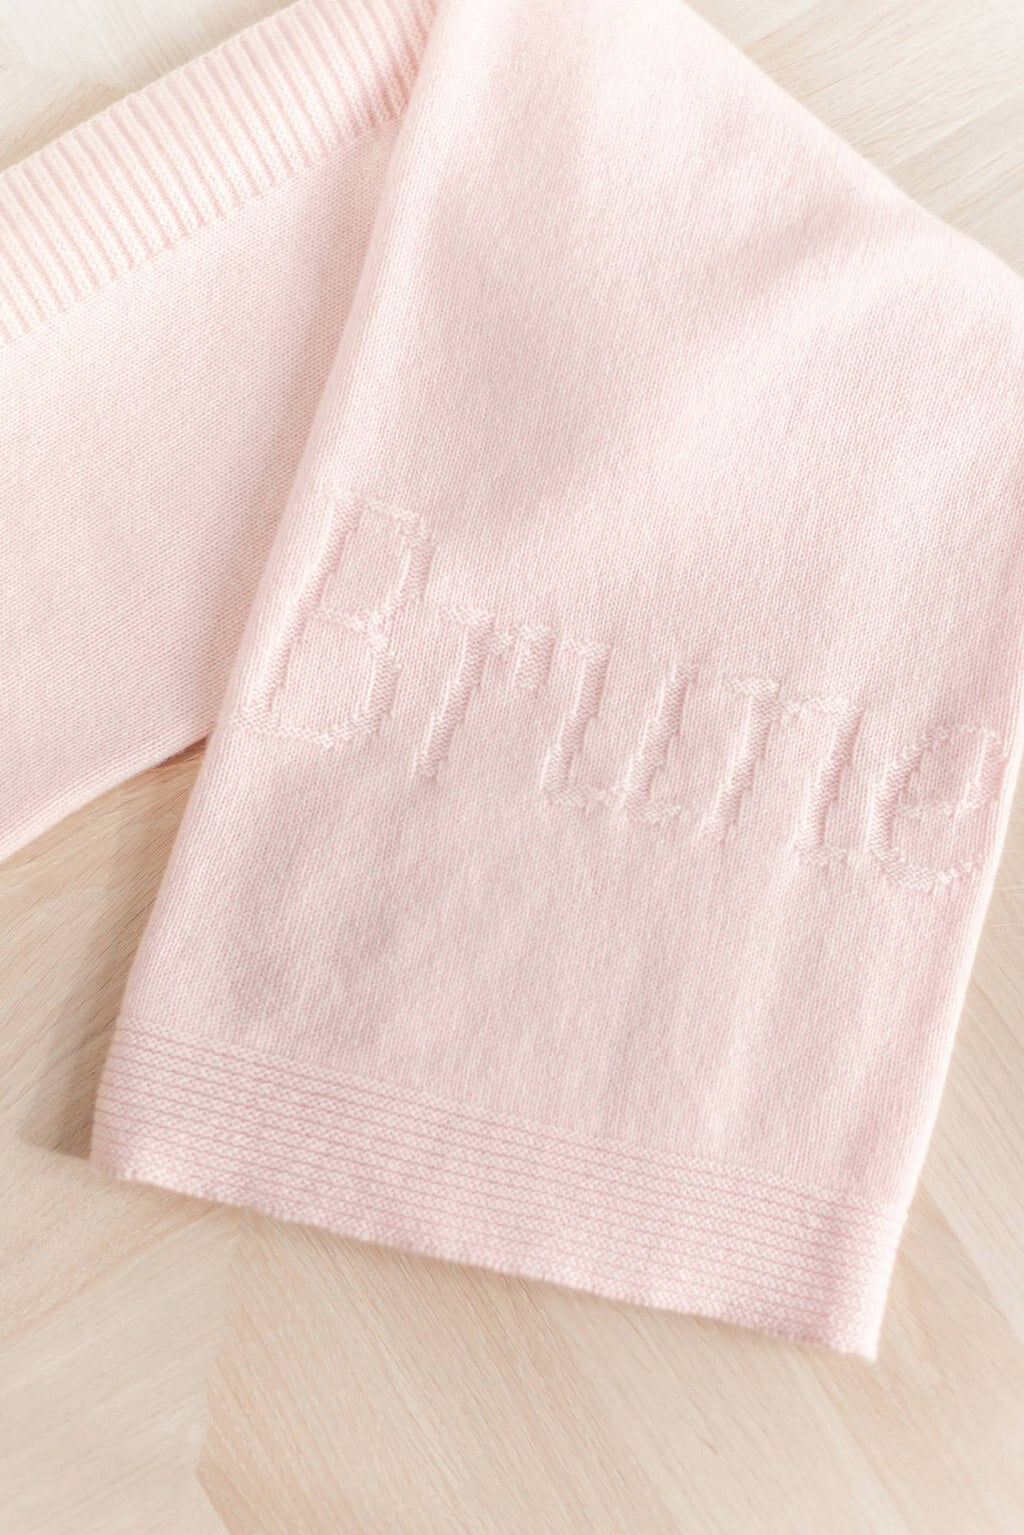 Blanket personalize -  Cashmere Pale pink